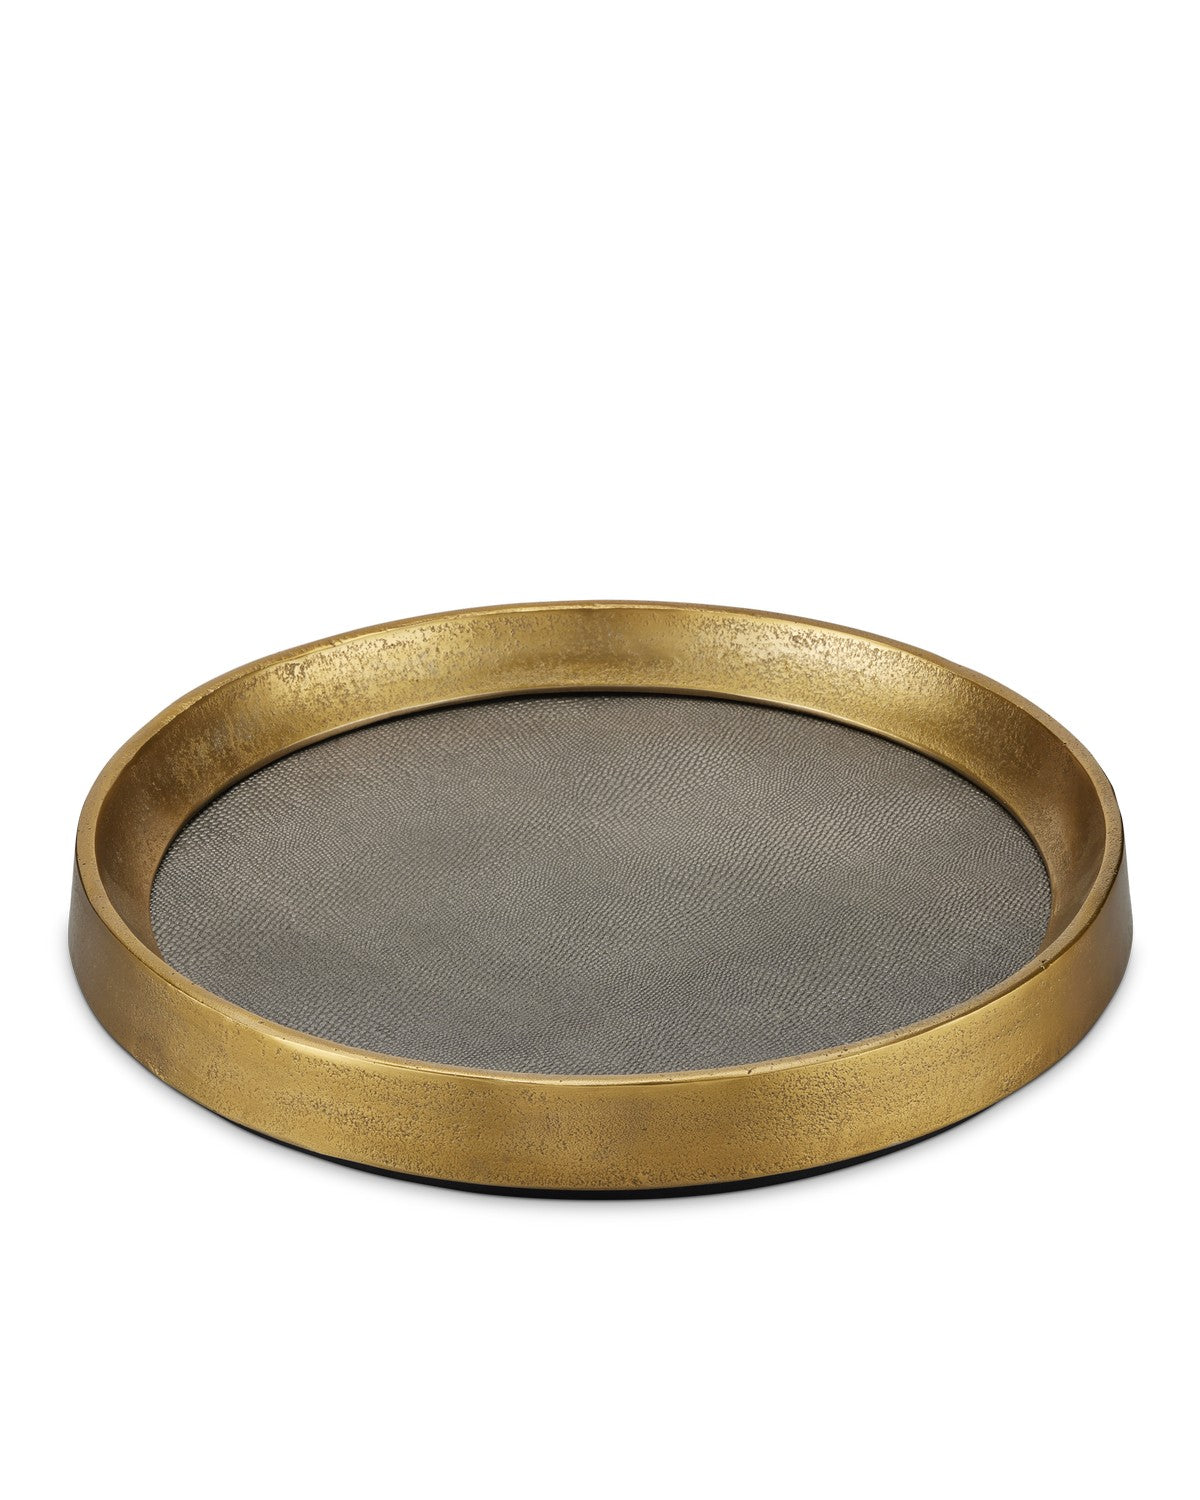 Currey and Company - 1200-0805 - Tray - Tanay - Antique Brass/Graphite/Black